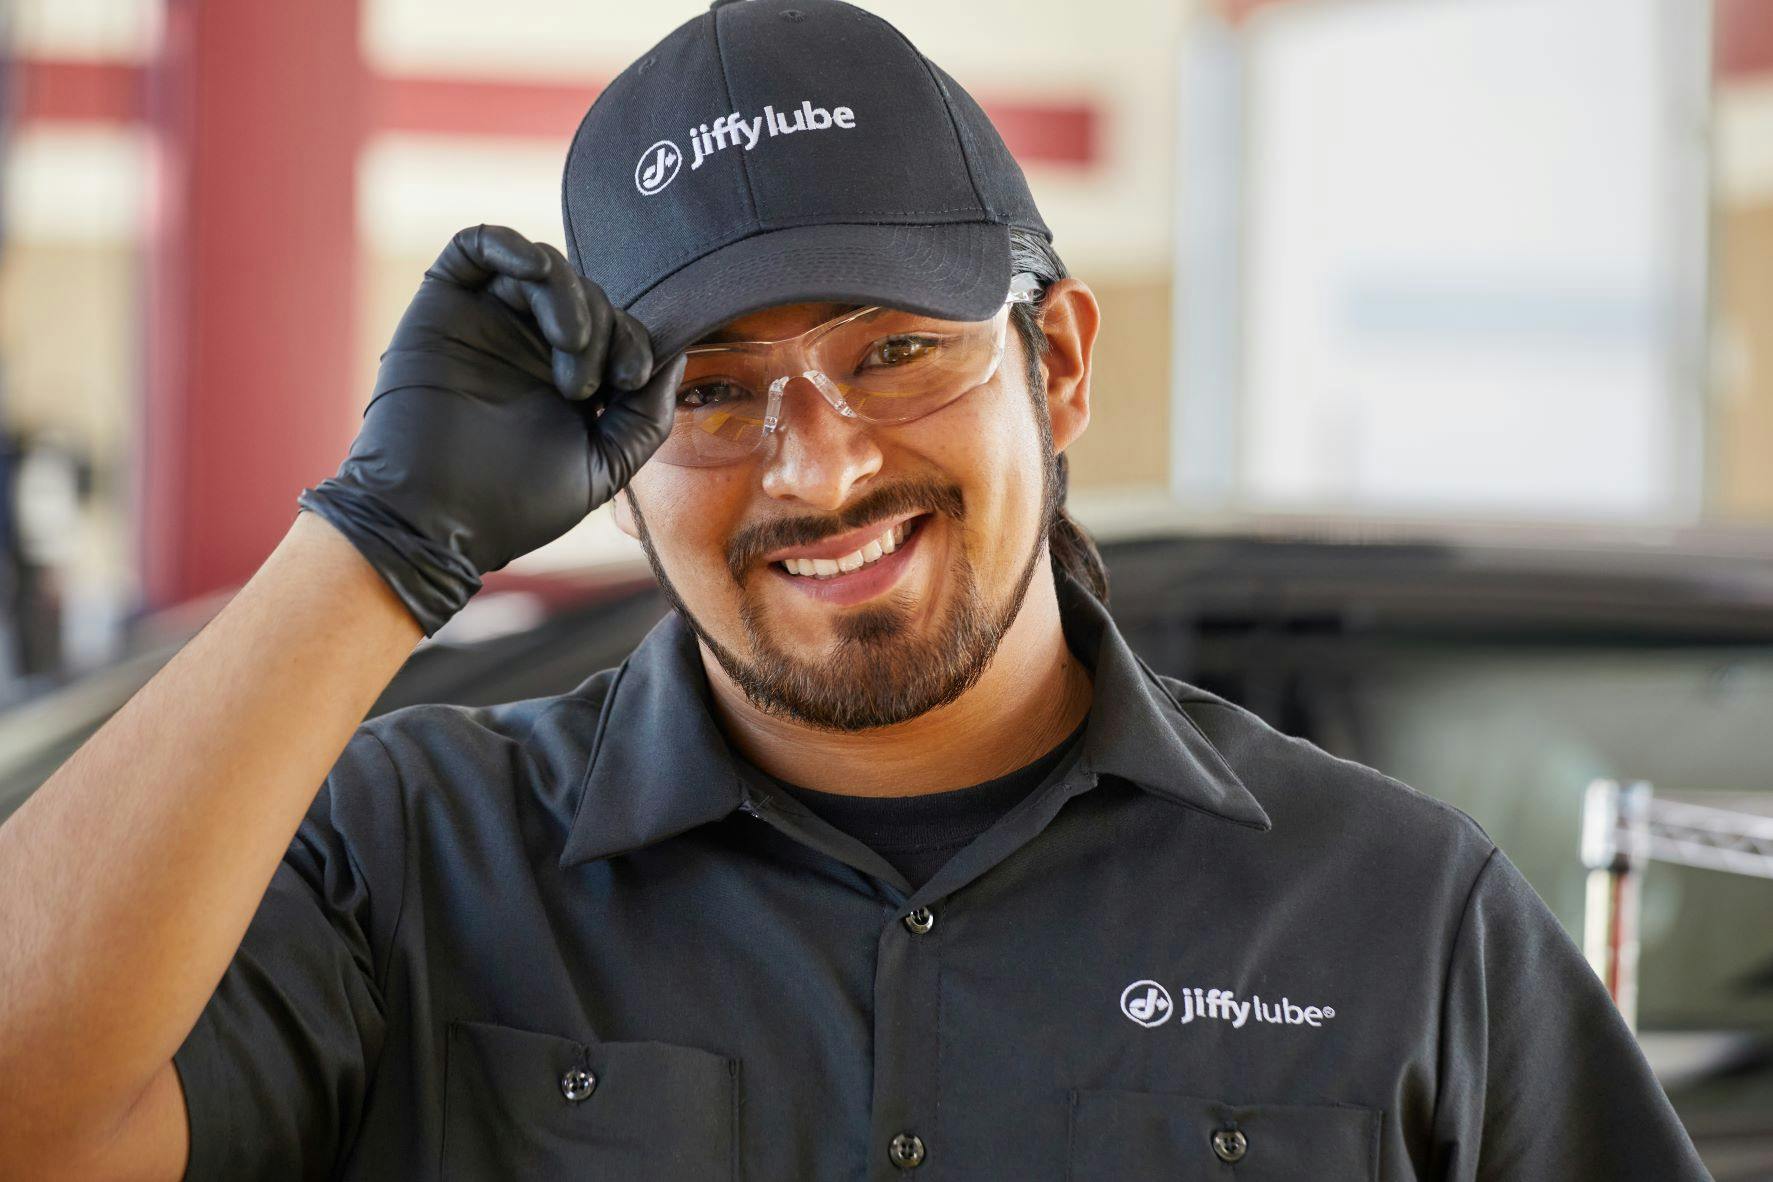 A Jiffy Lube service member with a warm, welcoming smile looking forward to helping a customer with a tire alignment service